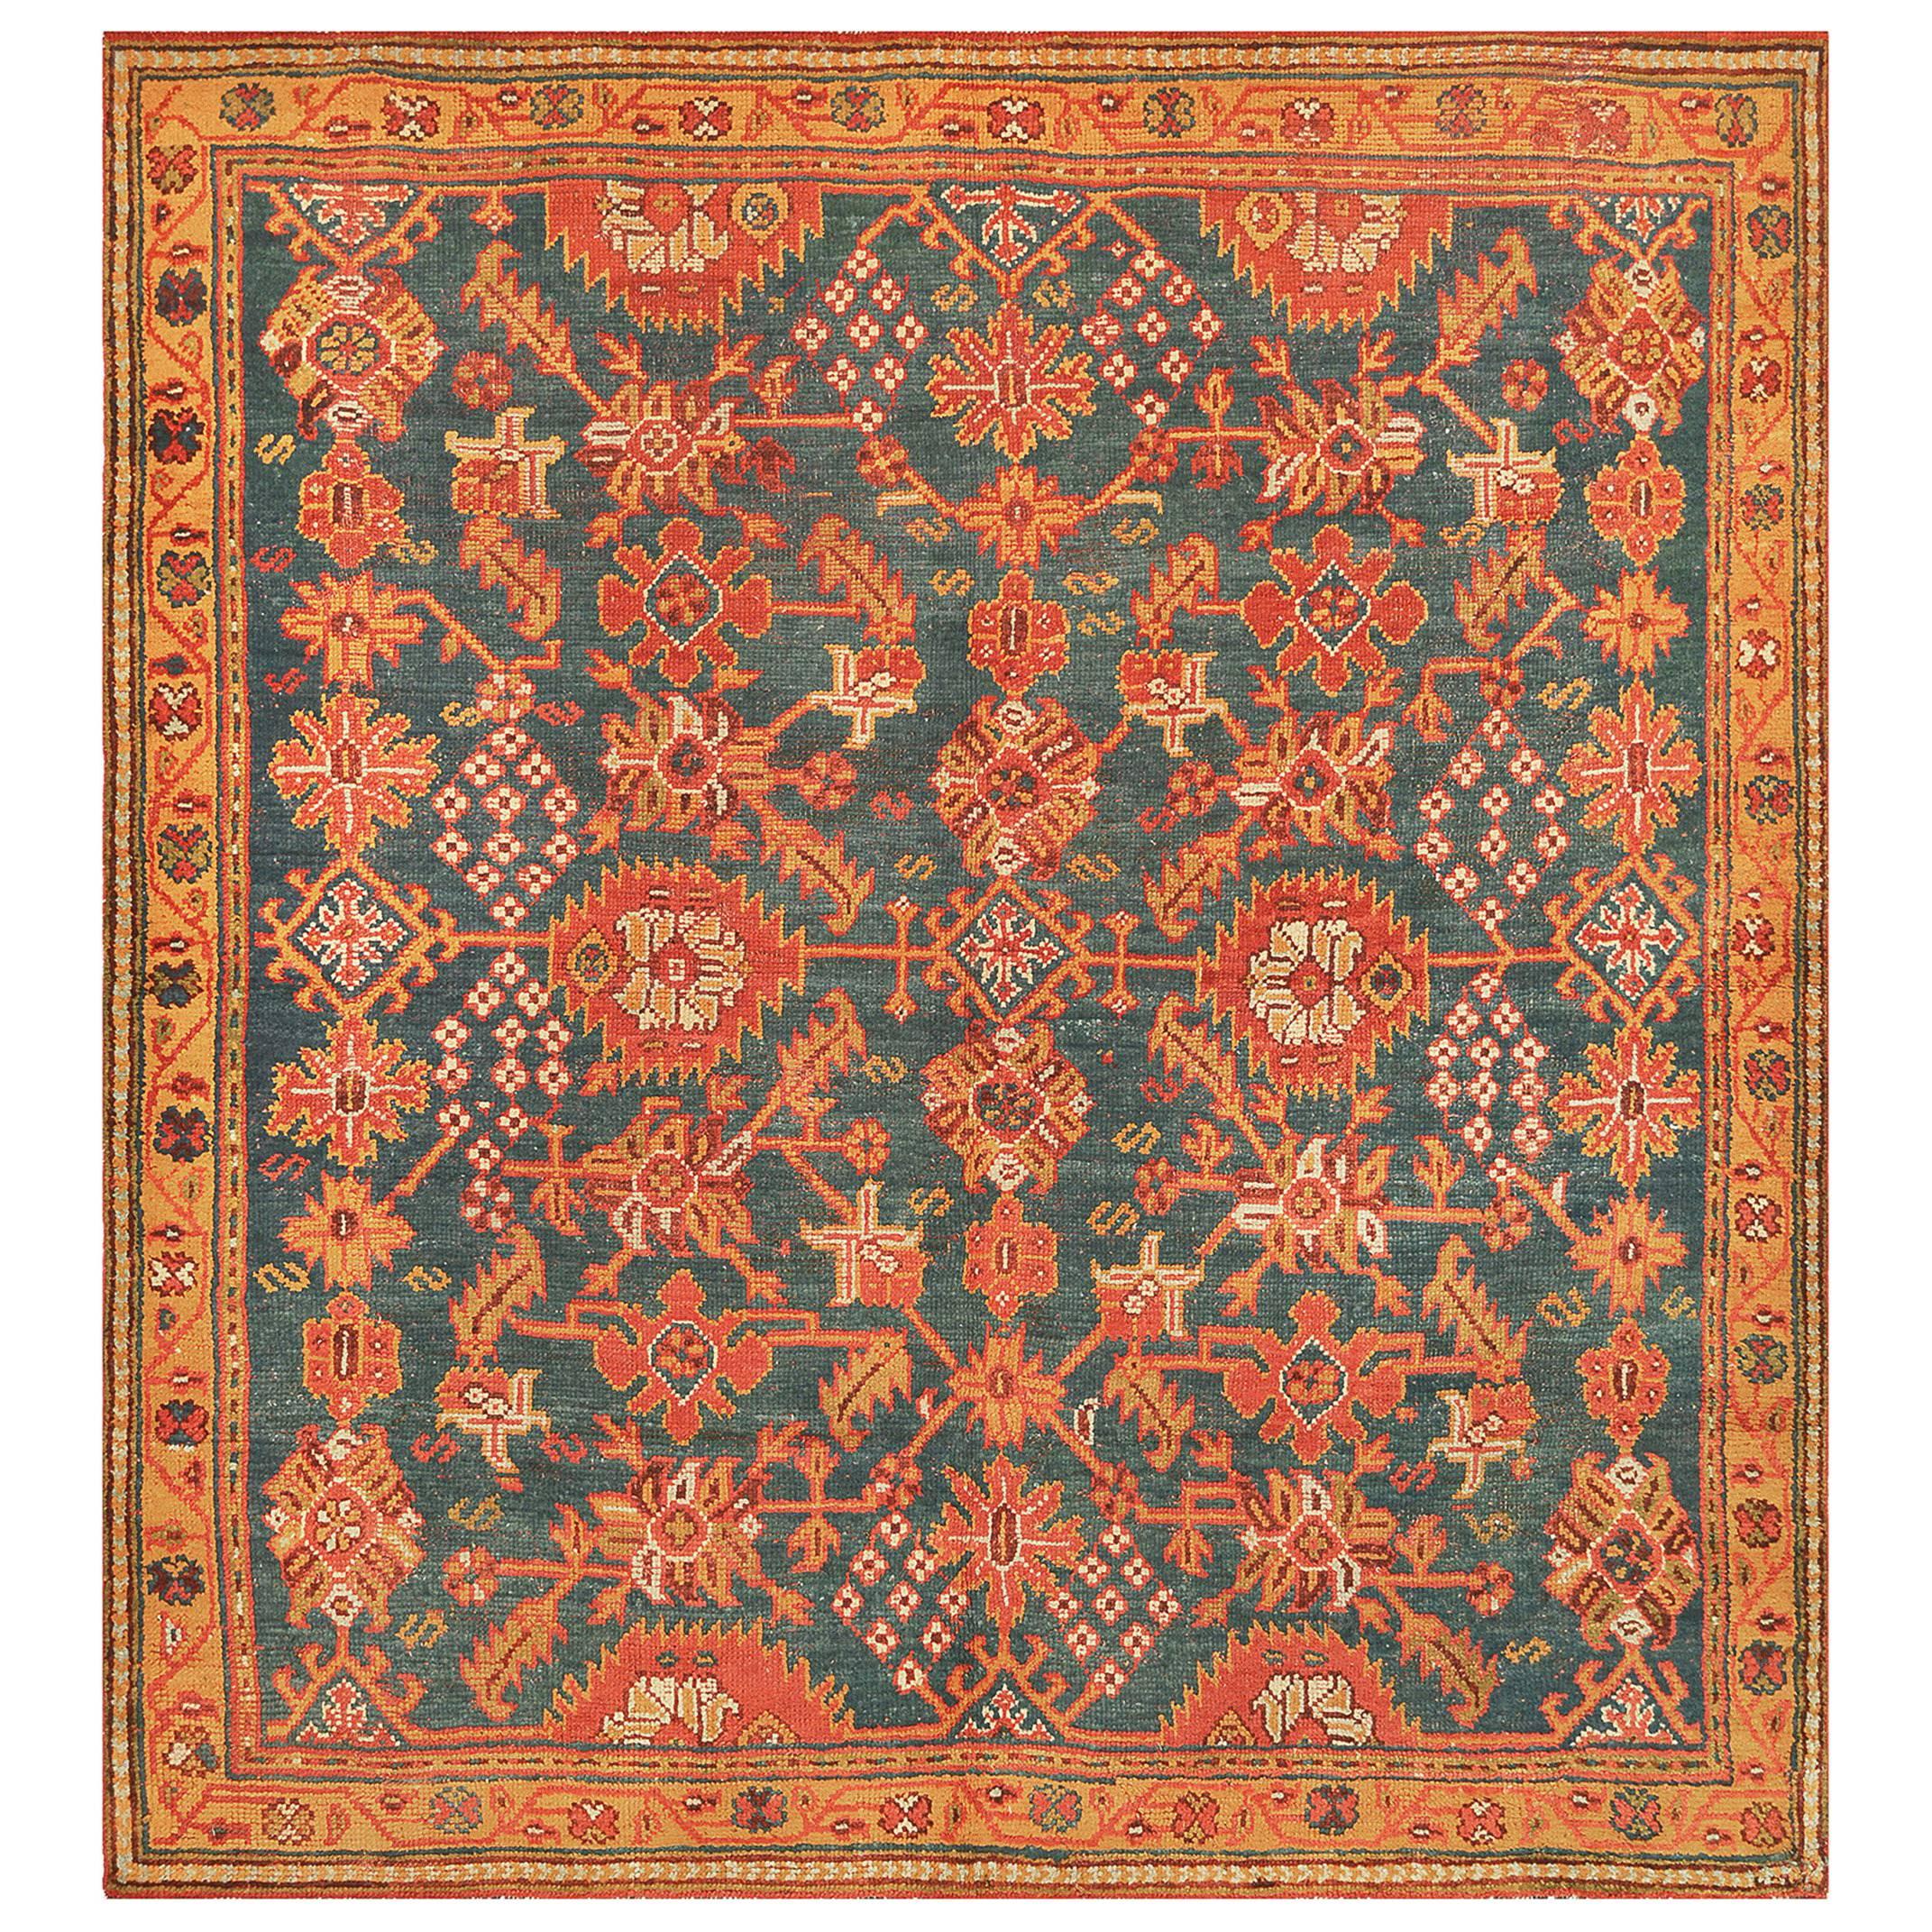 Hand-Woven Early 20th Century Wool Oushak Rug from West Anatolia